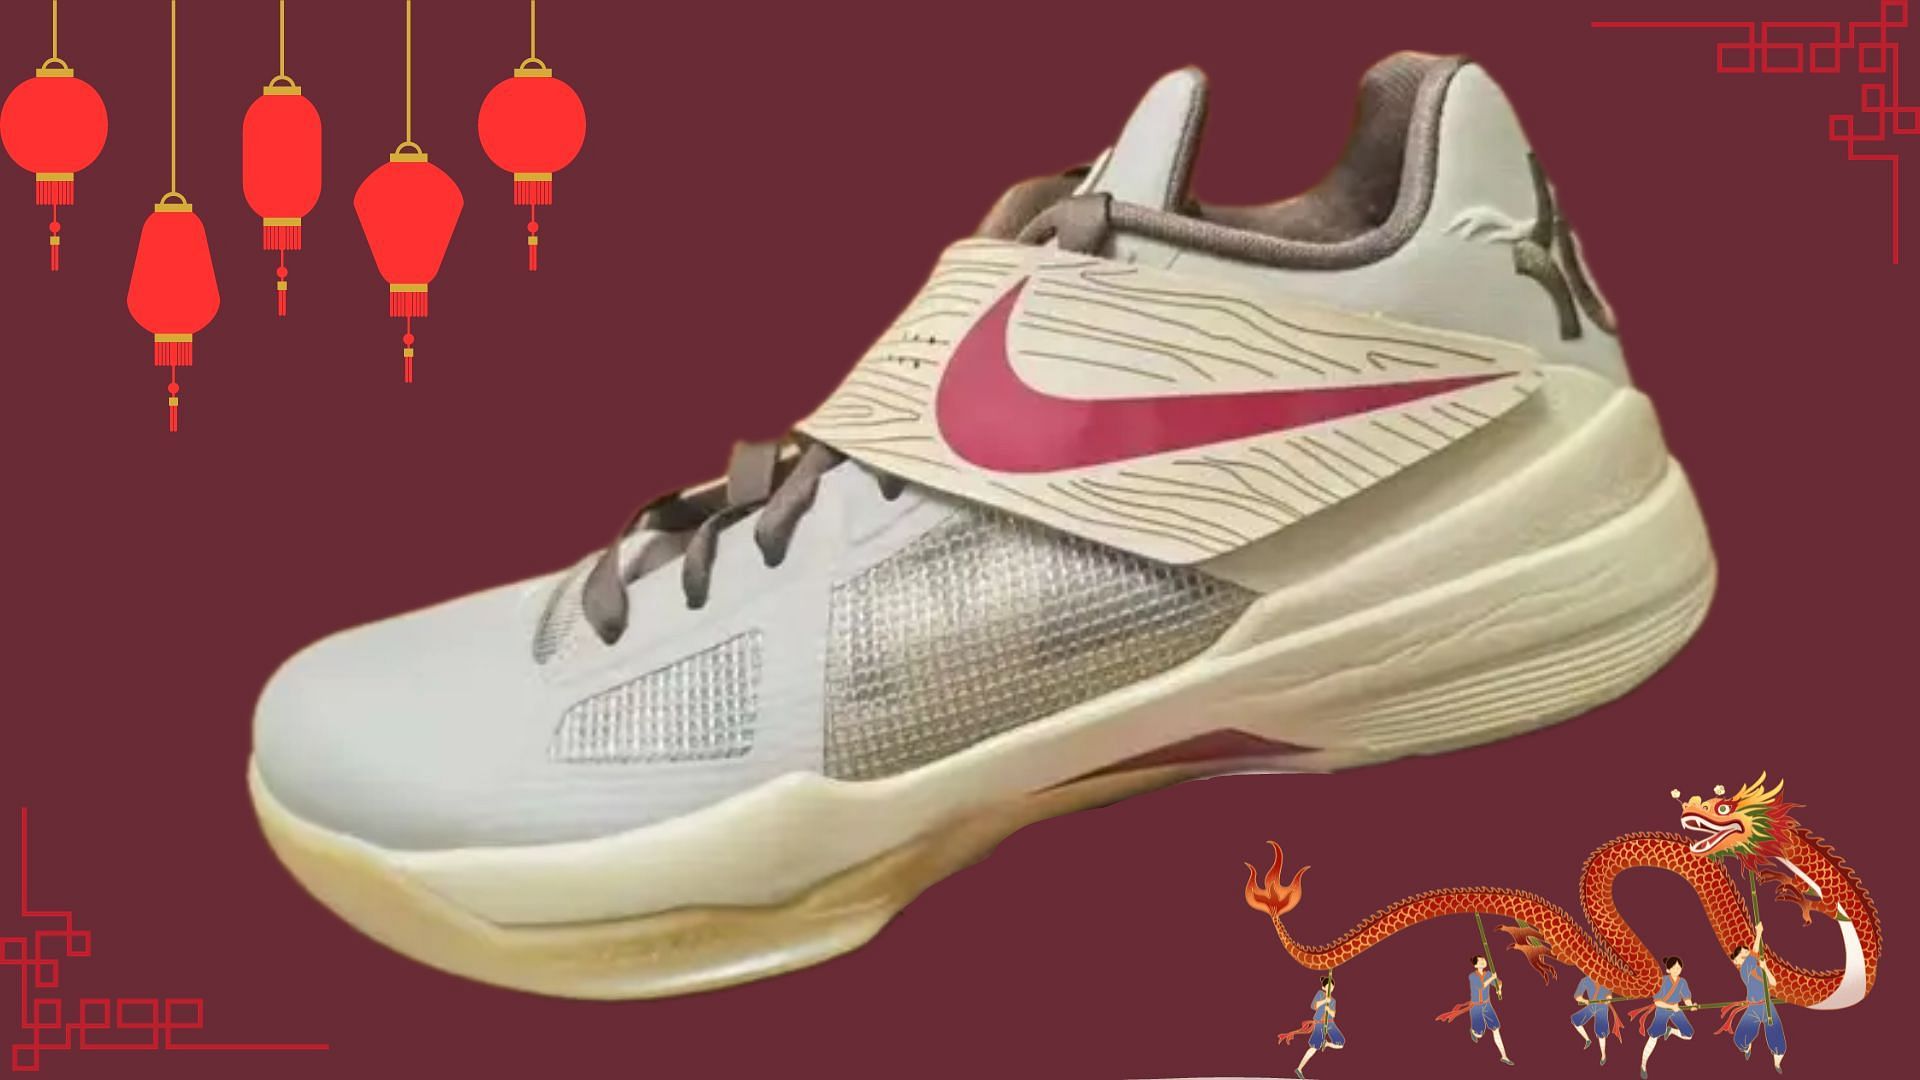 Nike KD 4 Year of the Dragon 2.0 shoes (Image via Twitter/@fuelkicks)